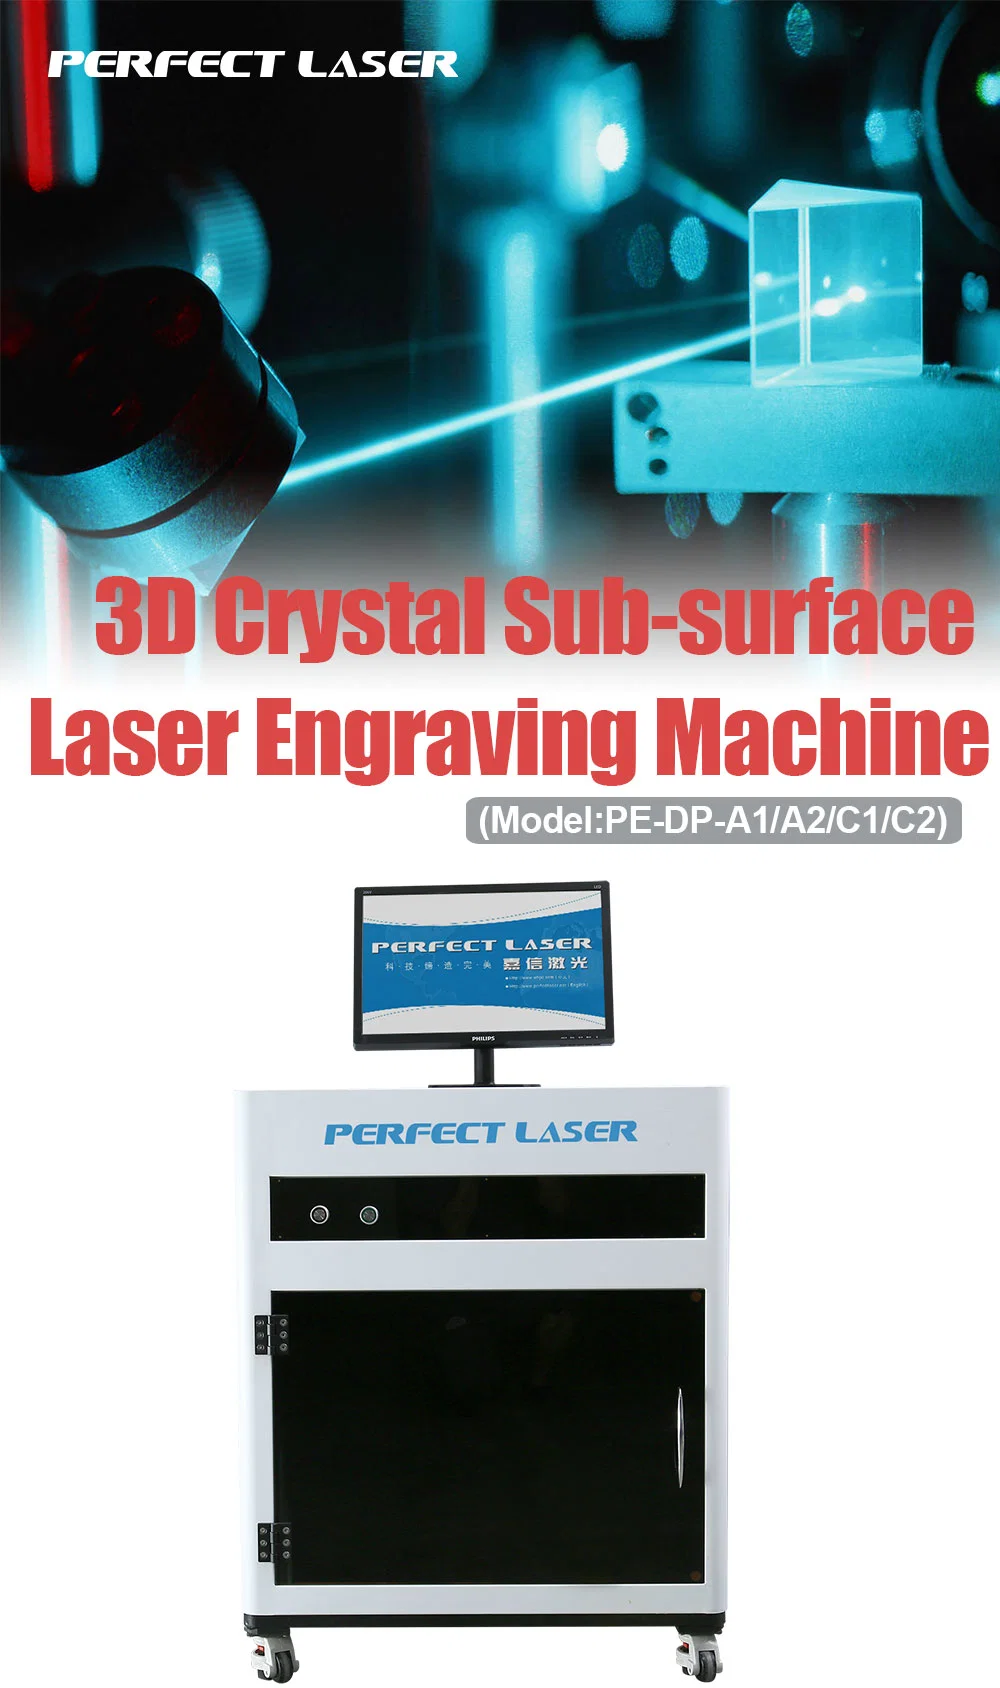 3D LED Crystal Cube/Trophy/Keychain/Craft Gift/Glass Ball with CCD Camera Human Portrait Photo Inside Subsurface CNC Laser Engraver Engraving Machines Price